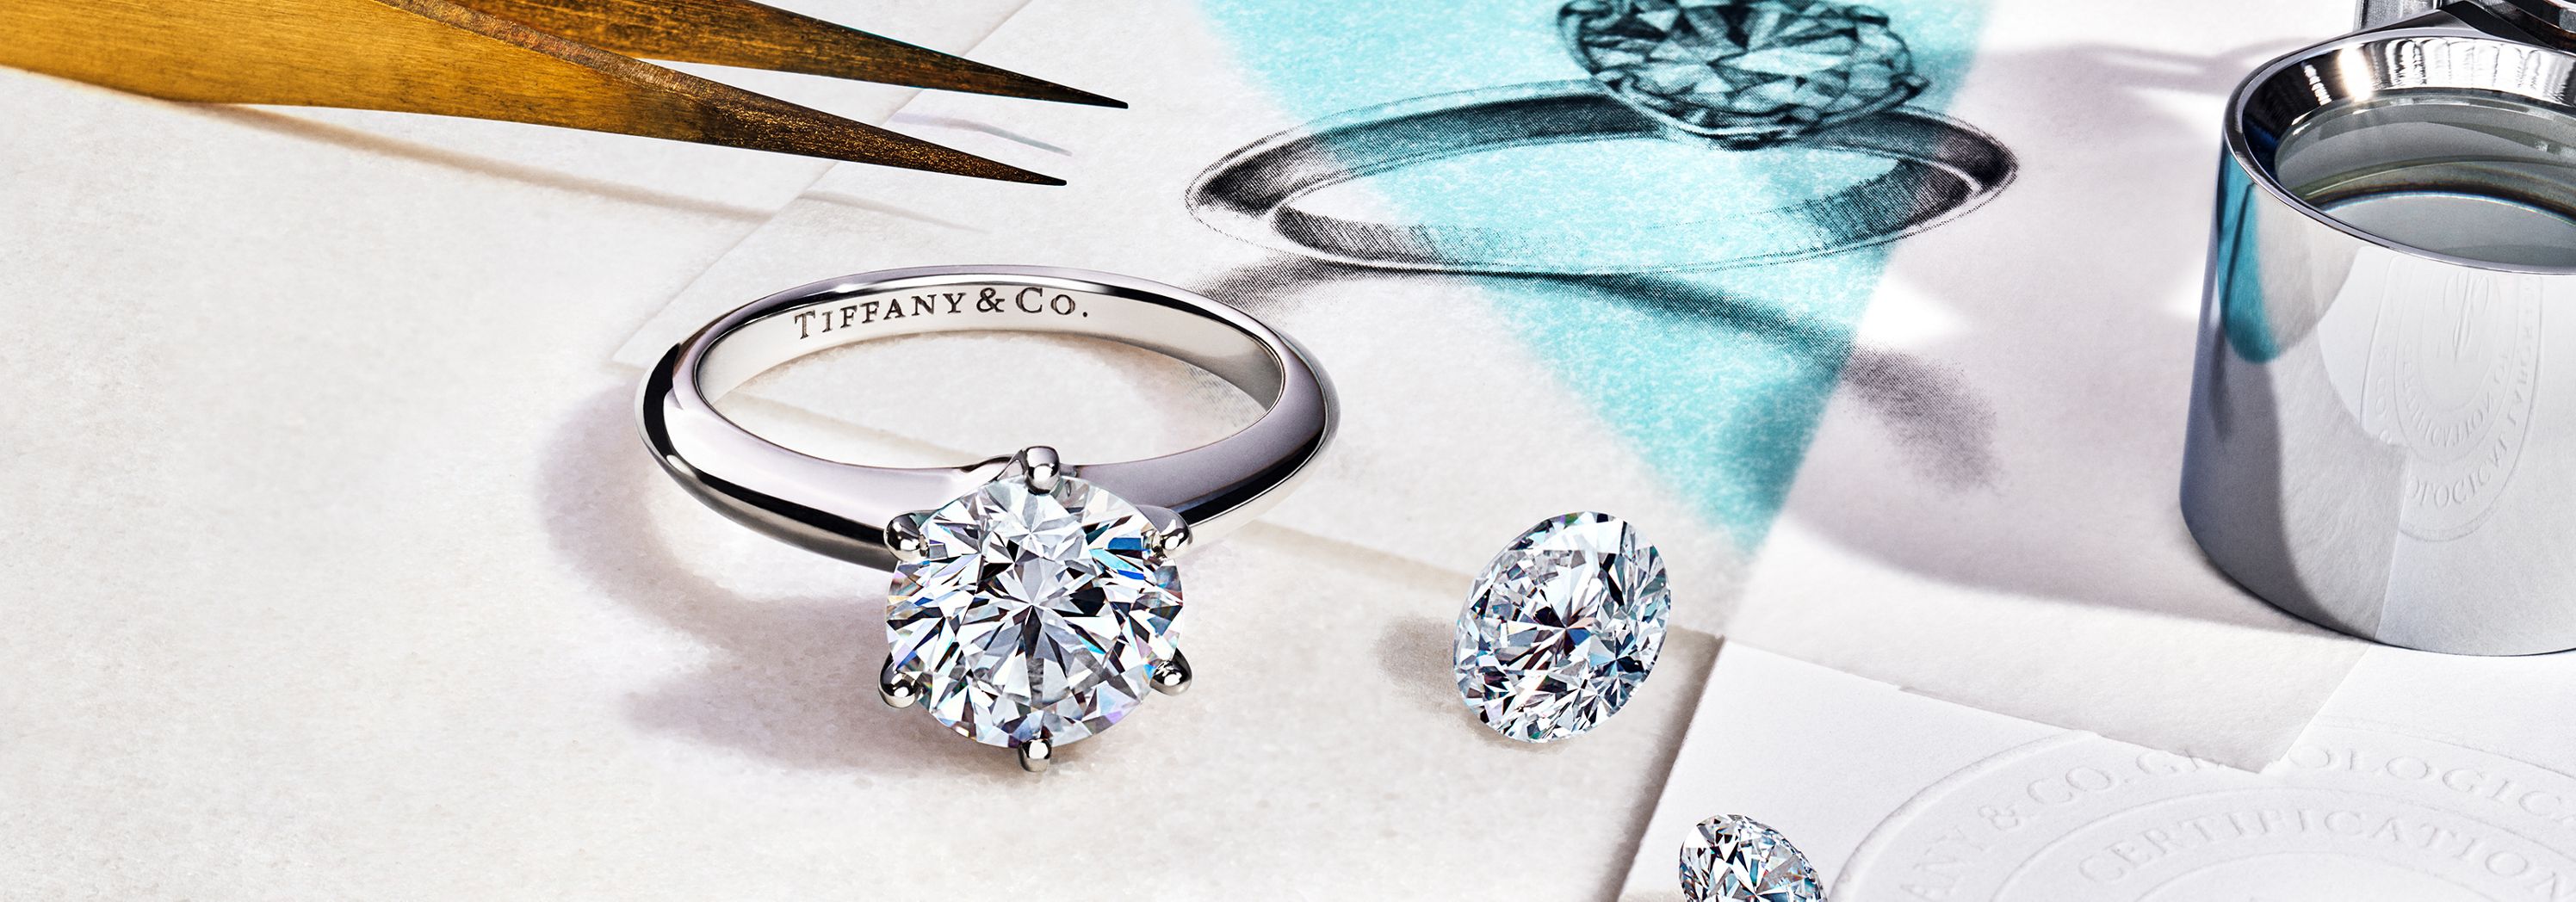 Tiffany Co Official Luxury Jewelry Gifts Accessories Since